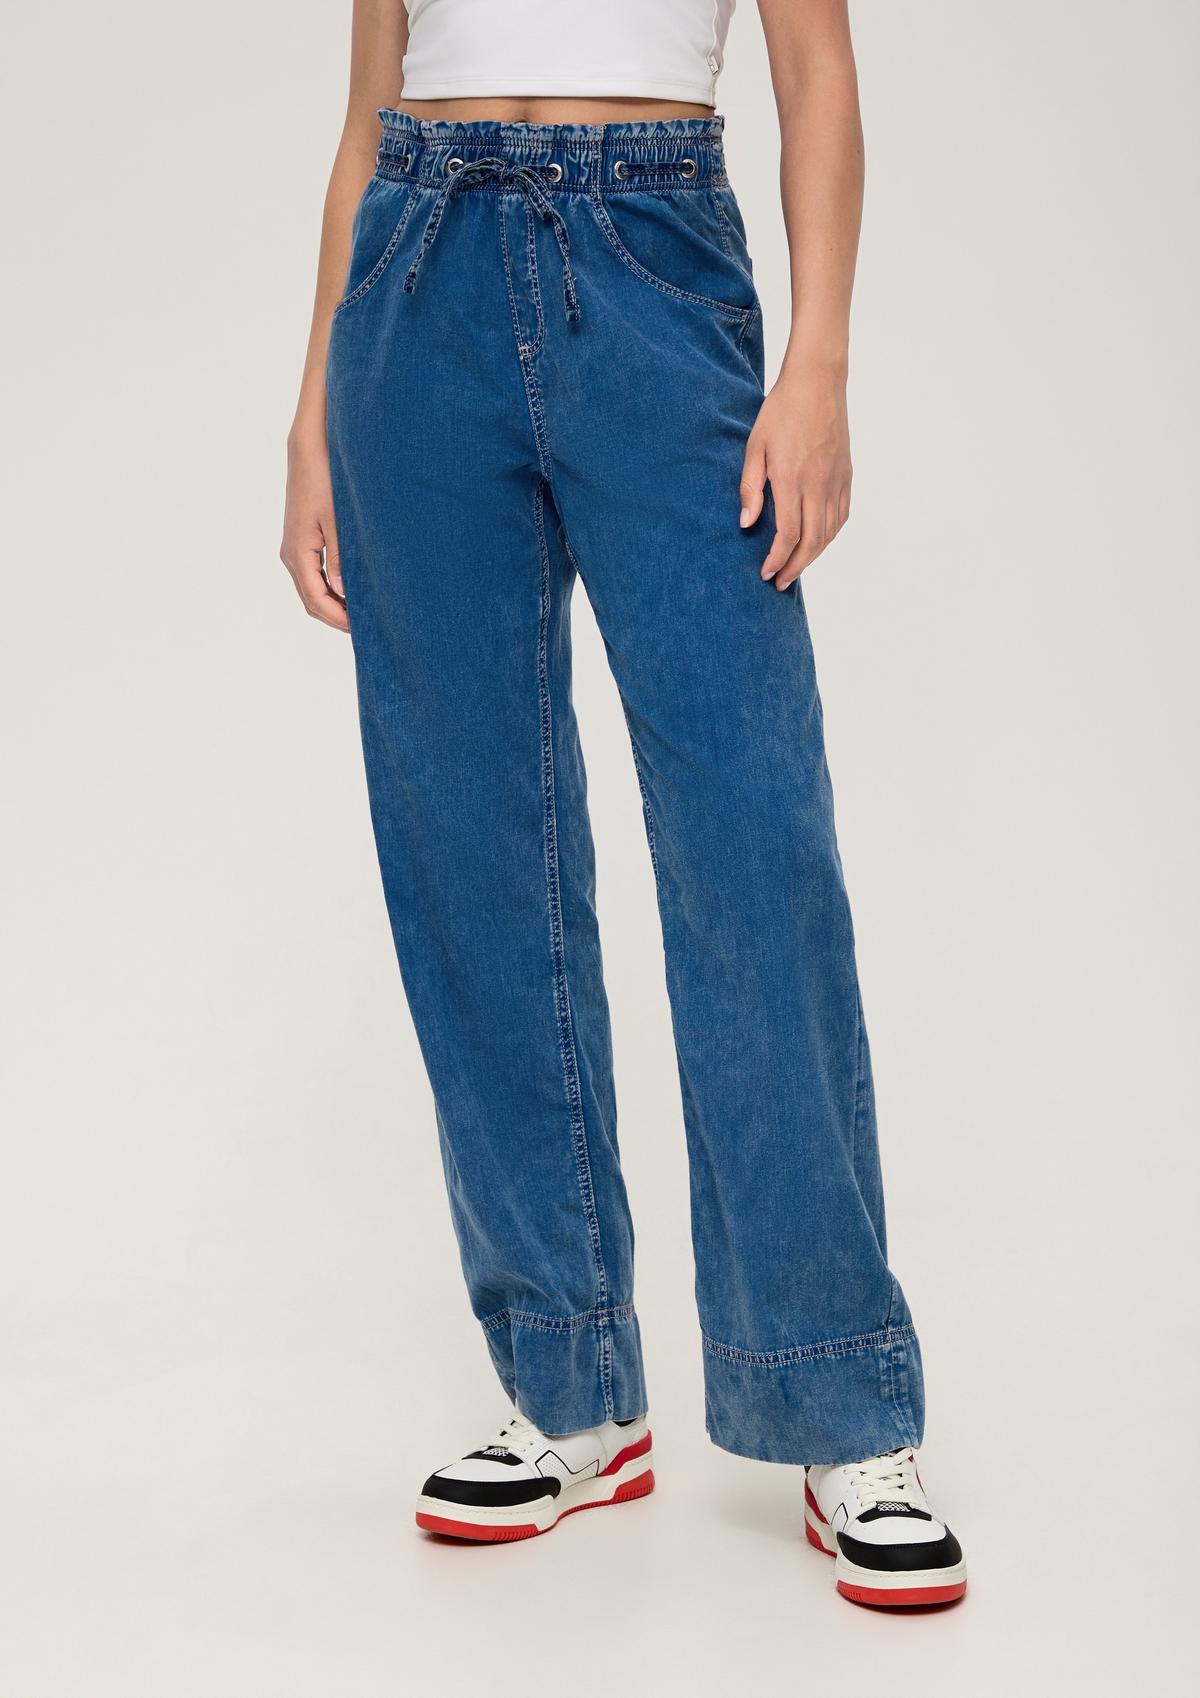 s.Oliver Jeans Catie / Slim Fit / Mid Rise / Wide Leg